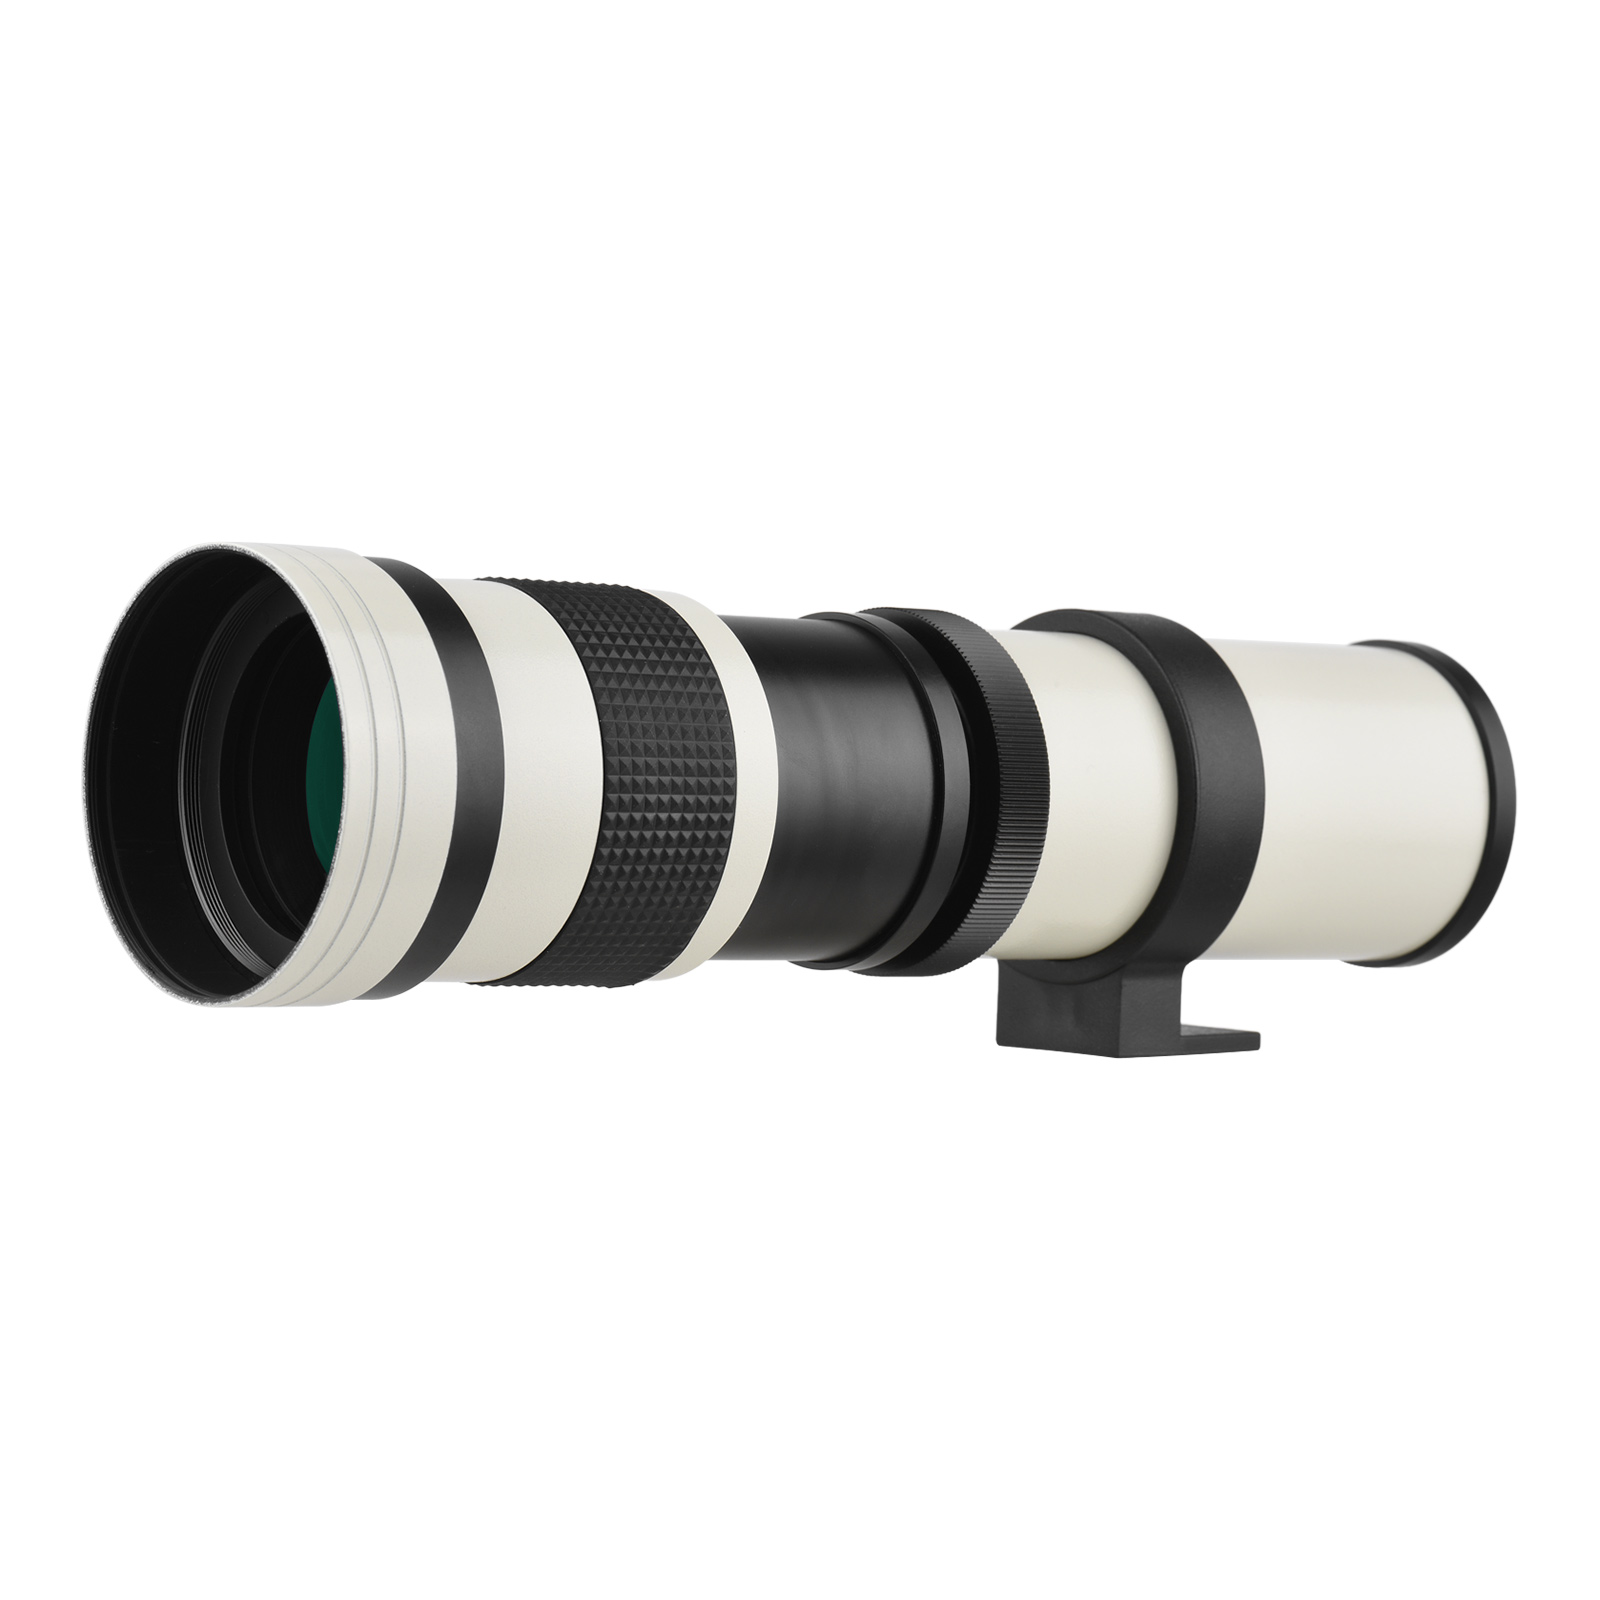 Walmeck  MF Super Telephoto Zoom Lens F8.3-16 420-800mm T2 Mount with M-mount Adapter Ring 14 Thread Replacement for  M M2  M5 M6 Mark II  M50 M100 M200 Cameras - image 5 of 7